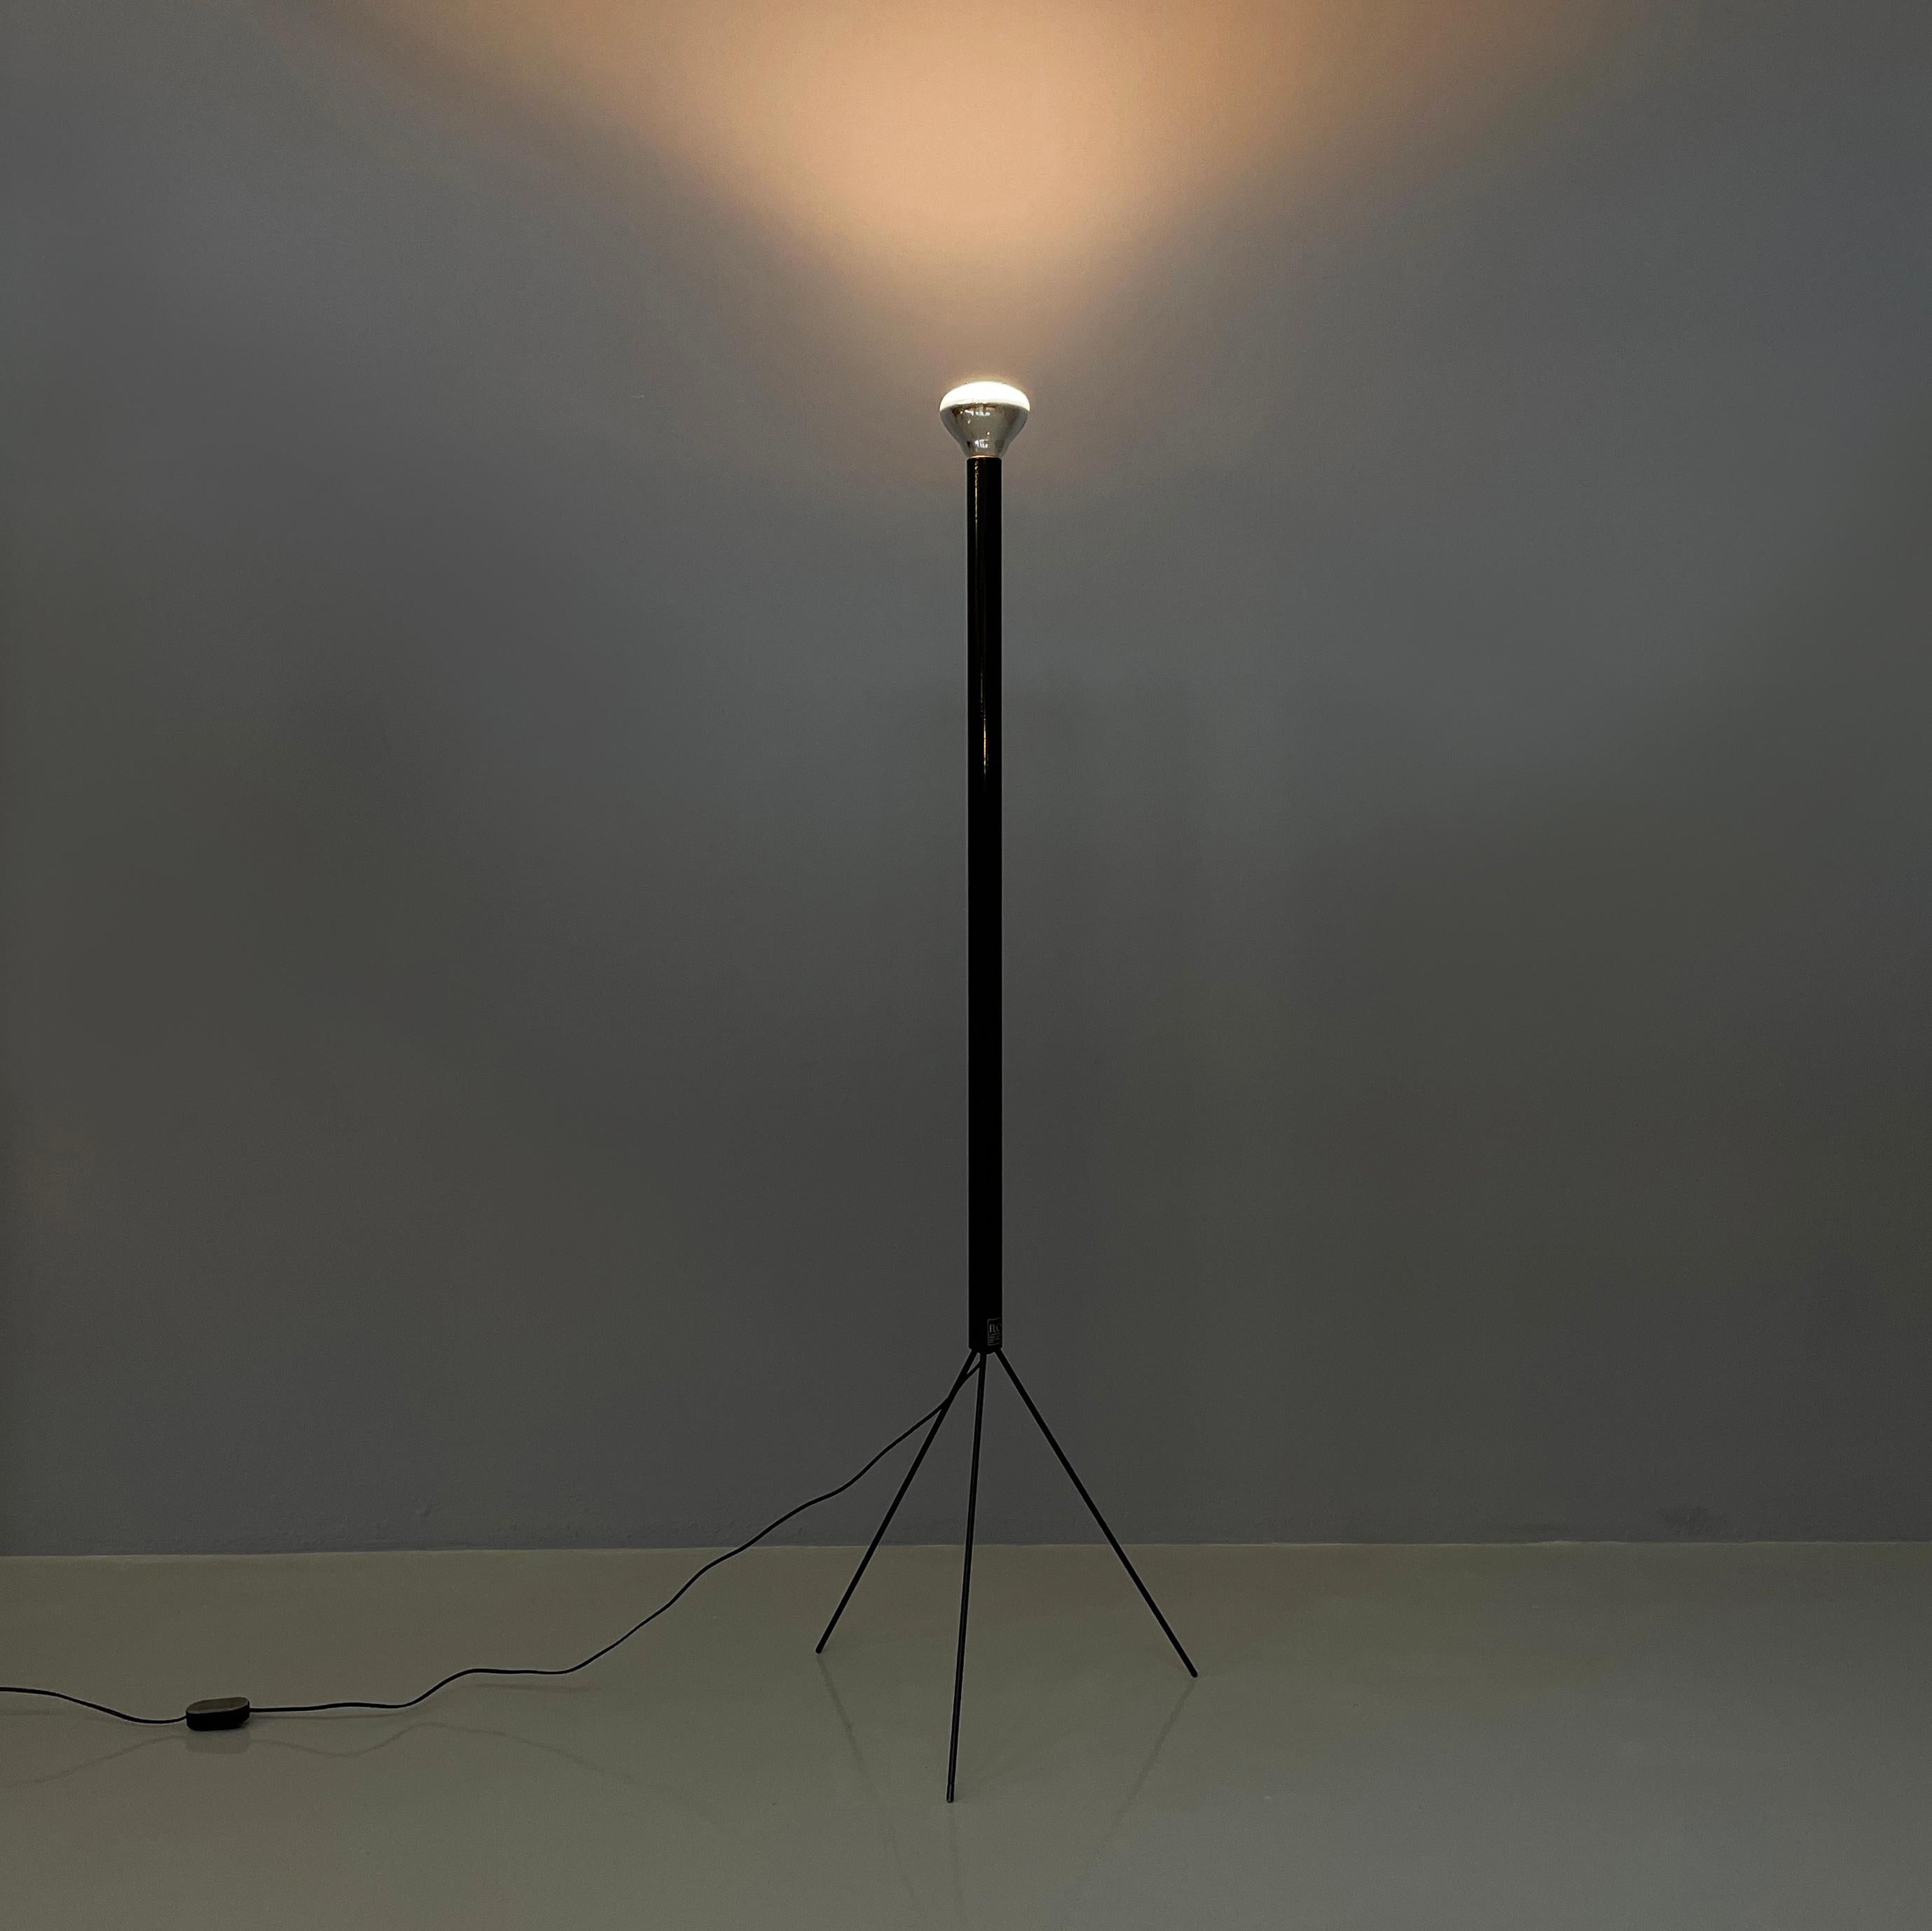 Italian modern floor lamp Luminator by Achille and Pier Giacomo Castiglioni, 1980s
Floor lamp mod. Luminator with cylindrical structure in black liquid painted metal. In the upper part there is the diffuser, the glass bulb, which points toward the